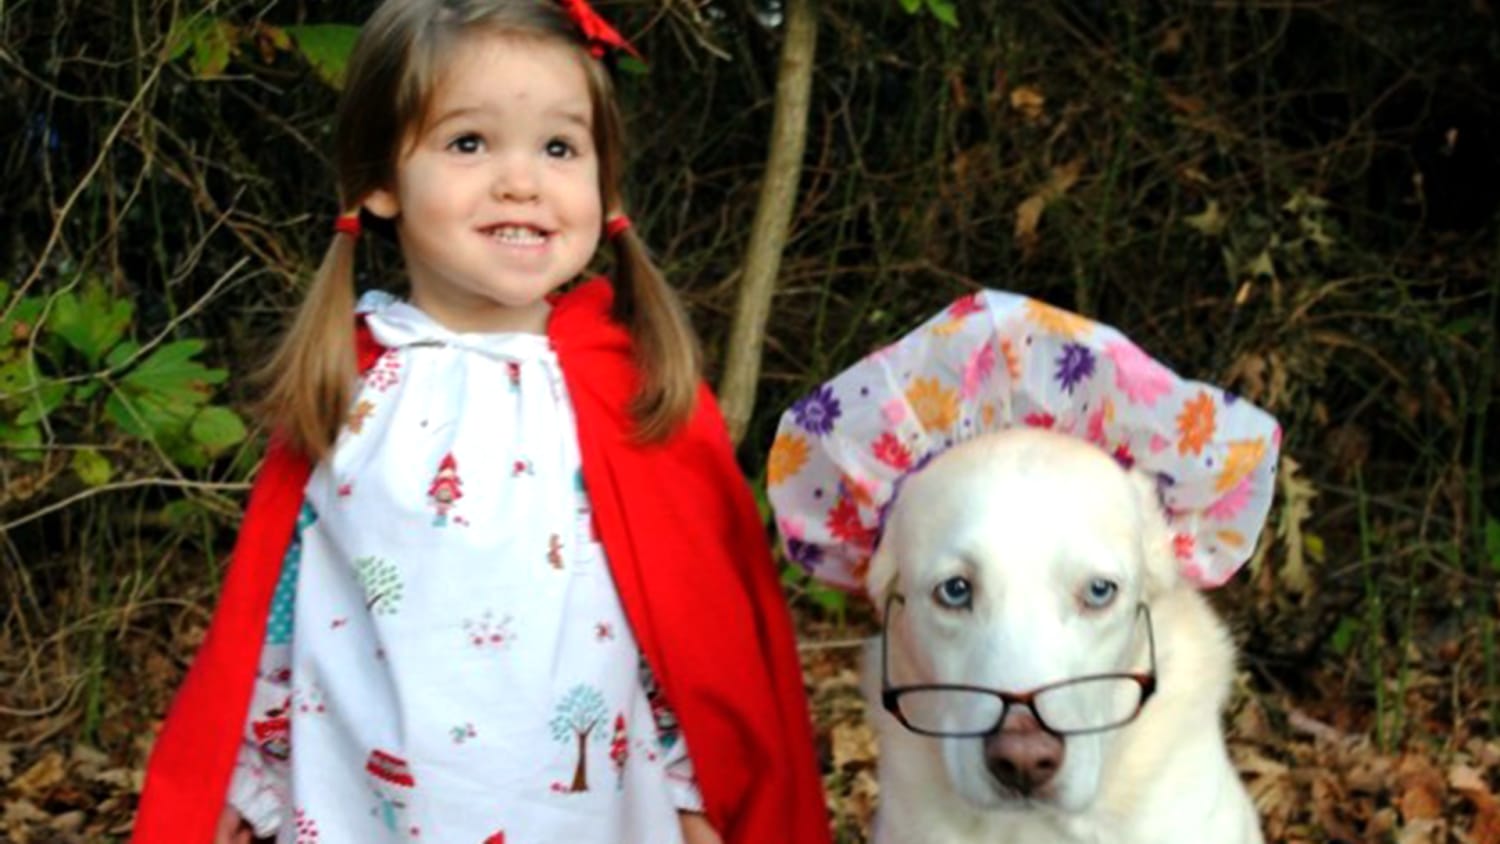 Easy kid's Halloween costume: Little Red Riding